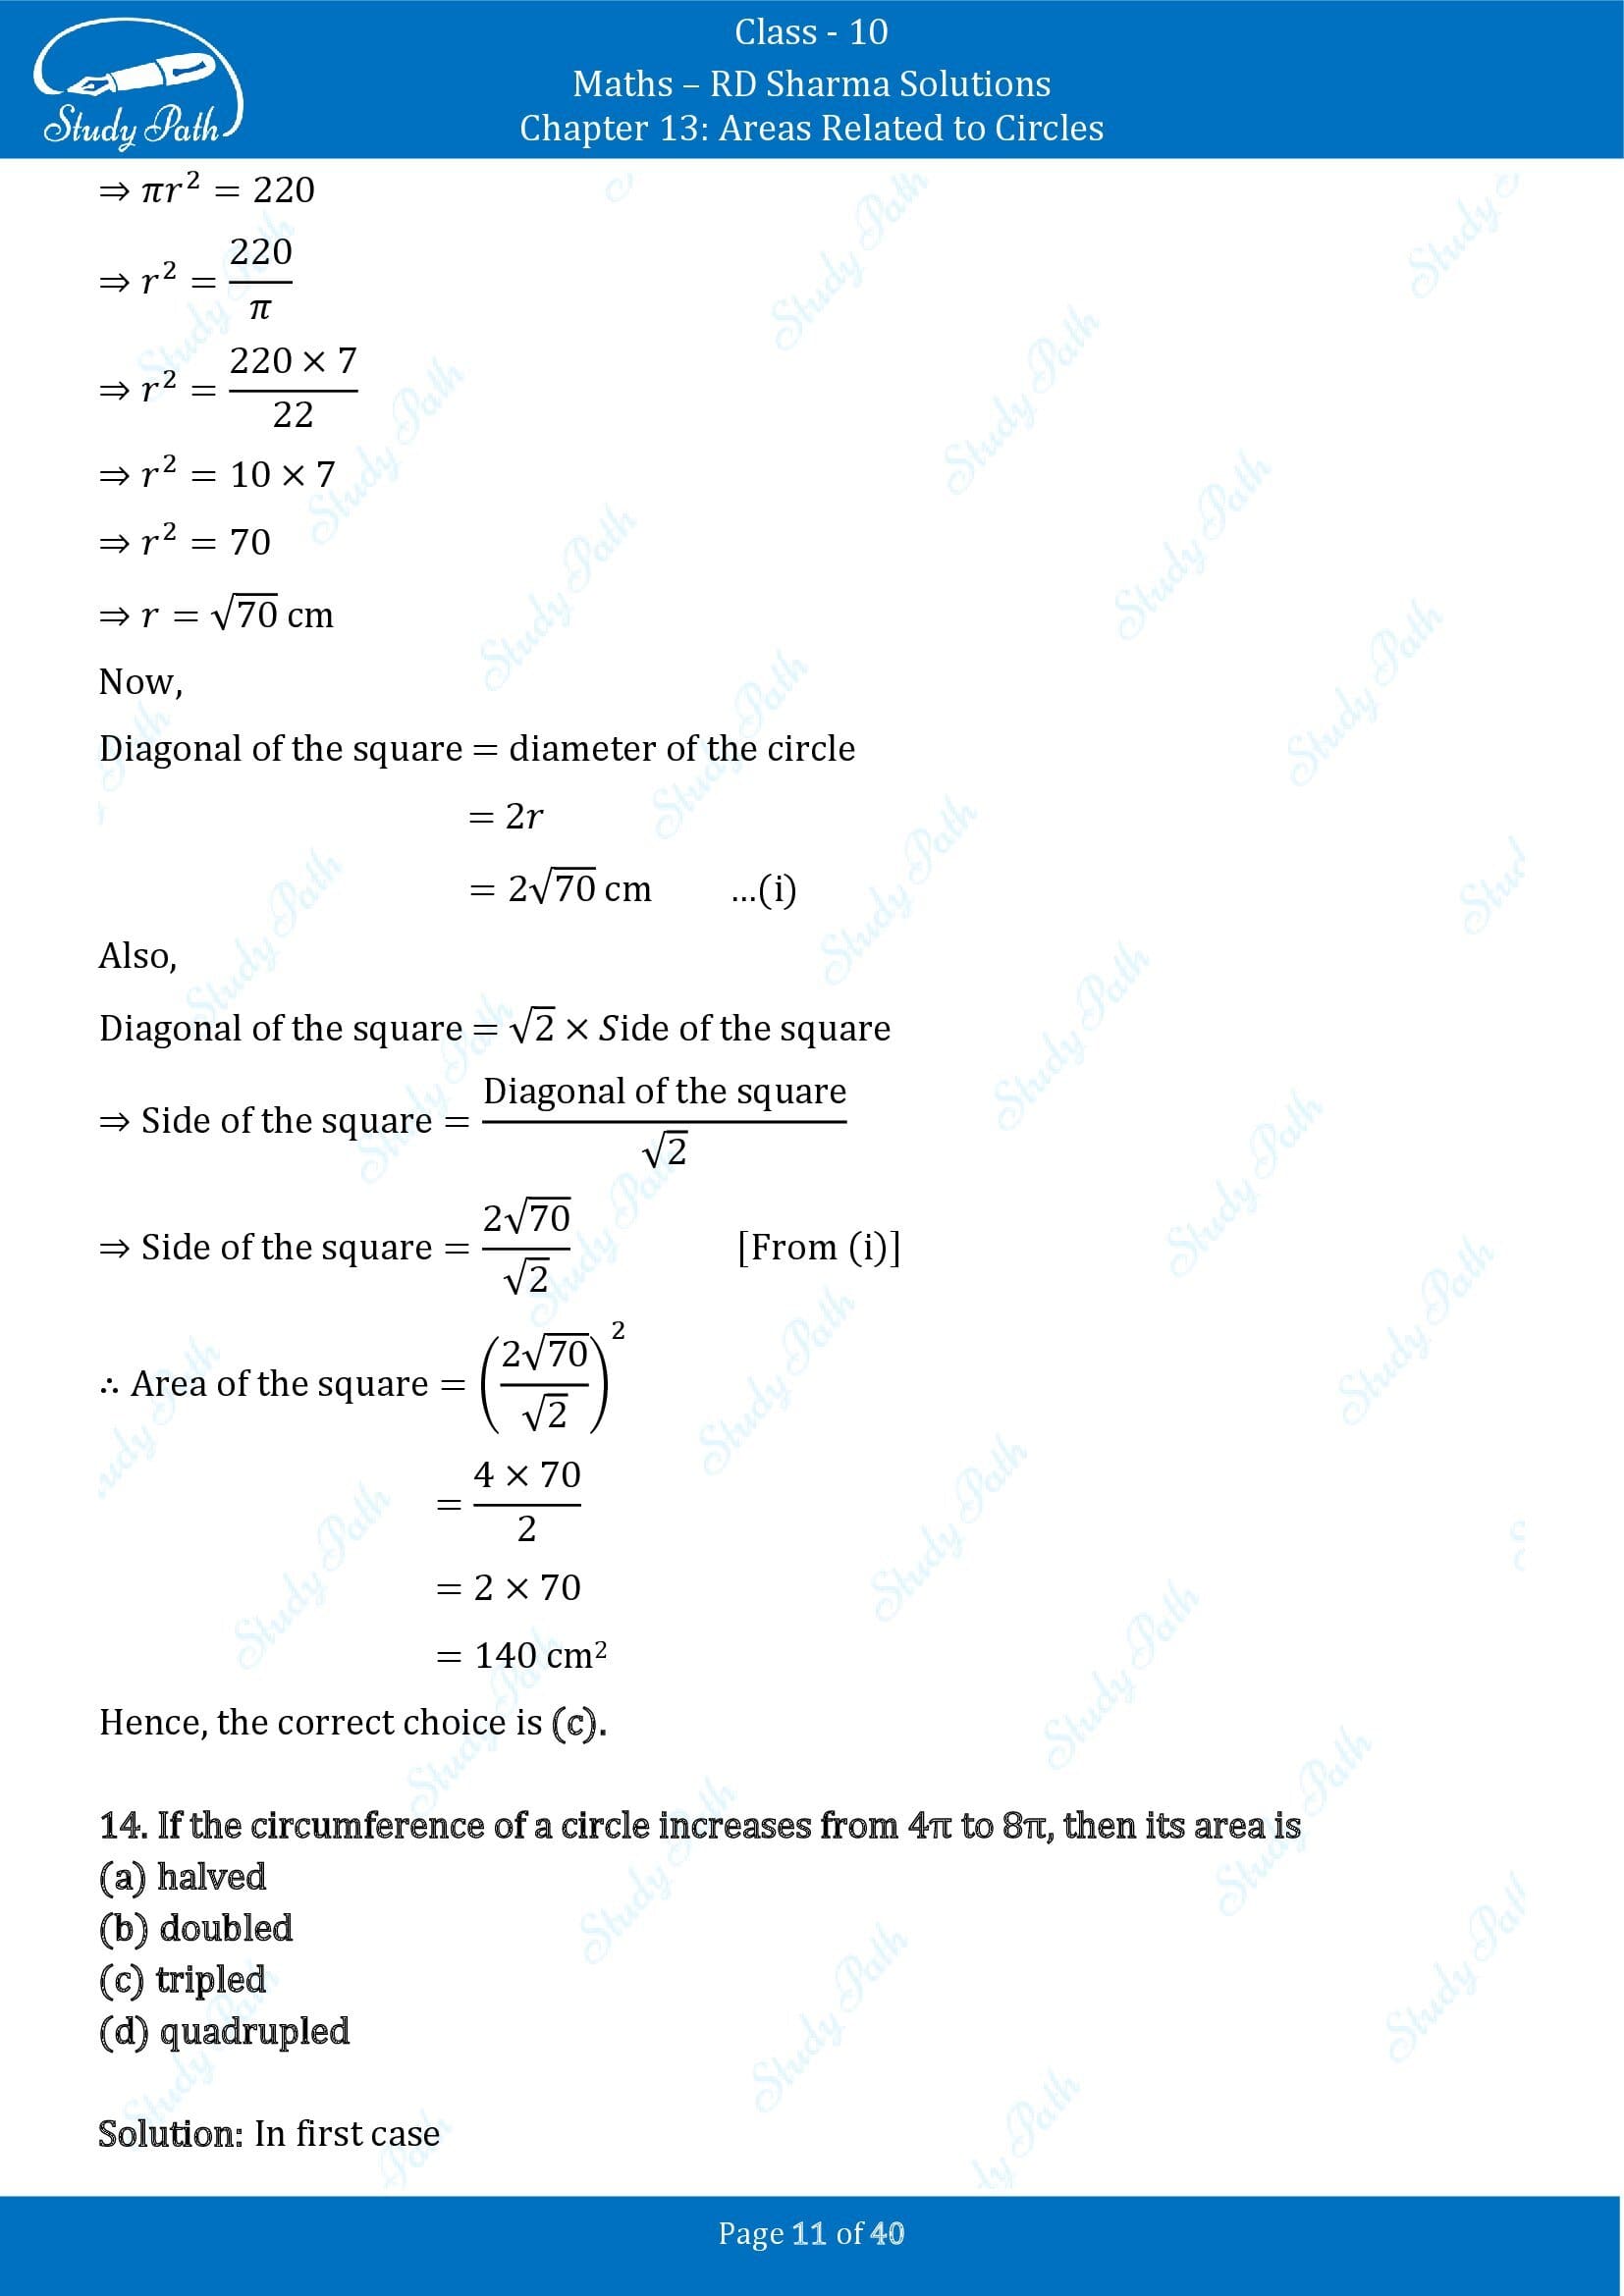 RD Sharma Solutions Class 10 Chapter 13 Areas Related to Circles Multiple Choice Question MCQs 00011